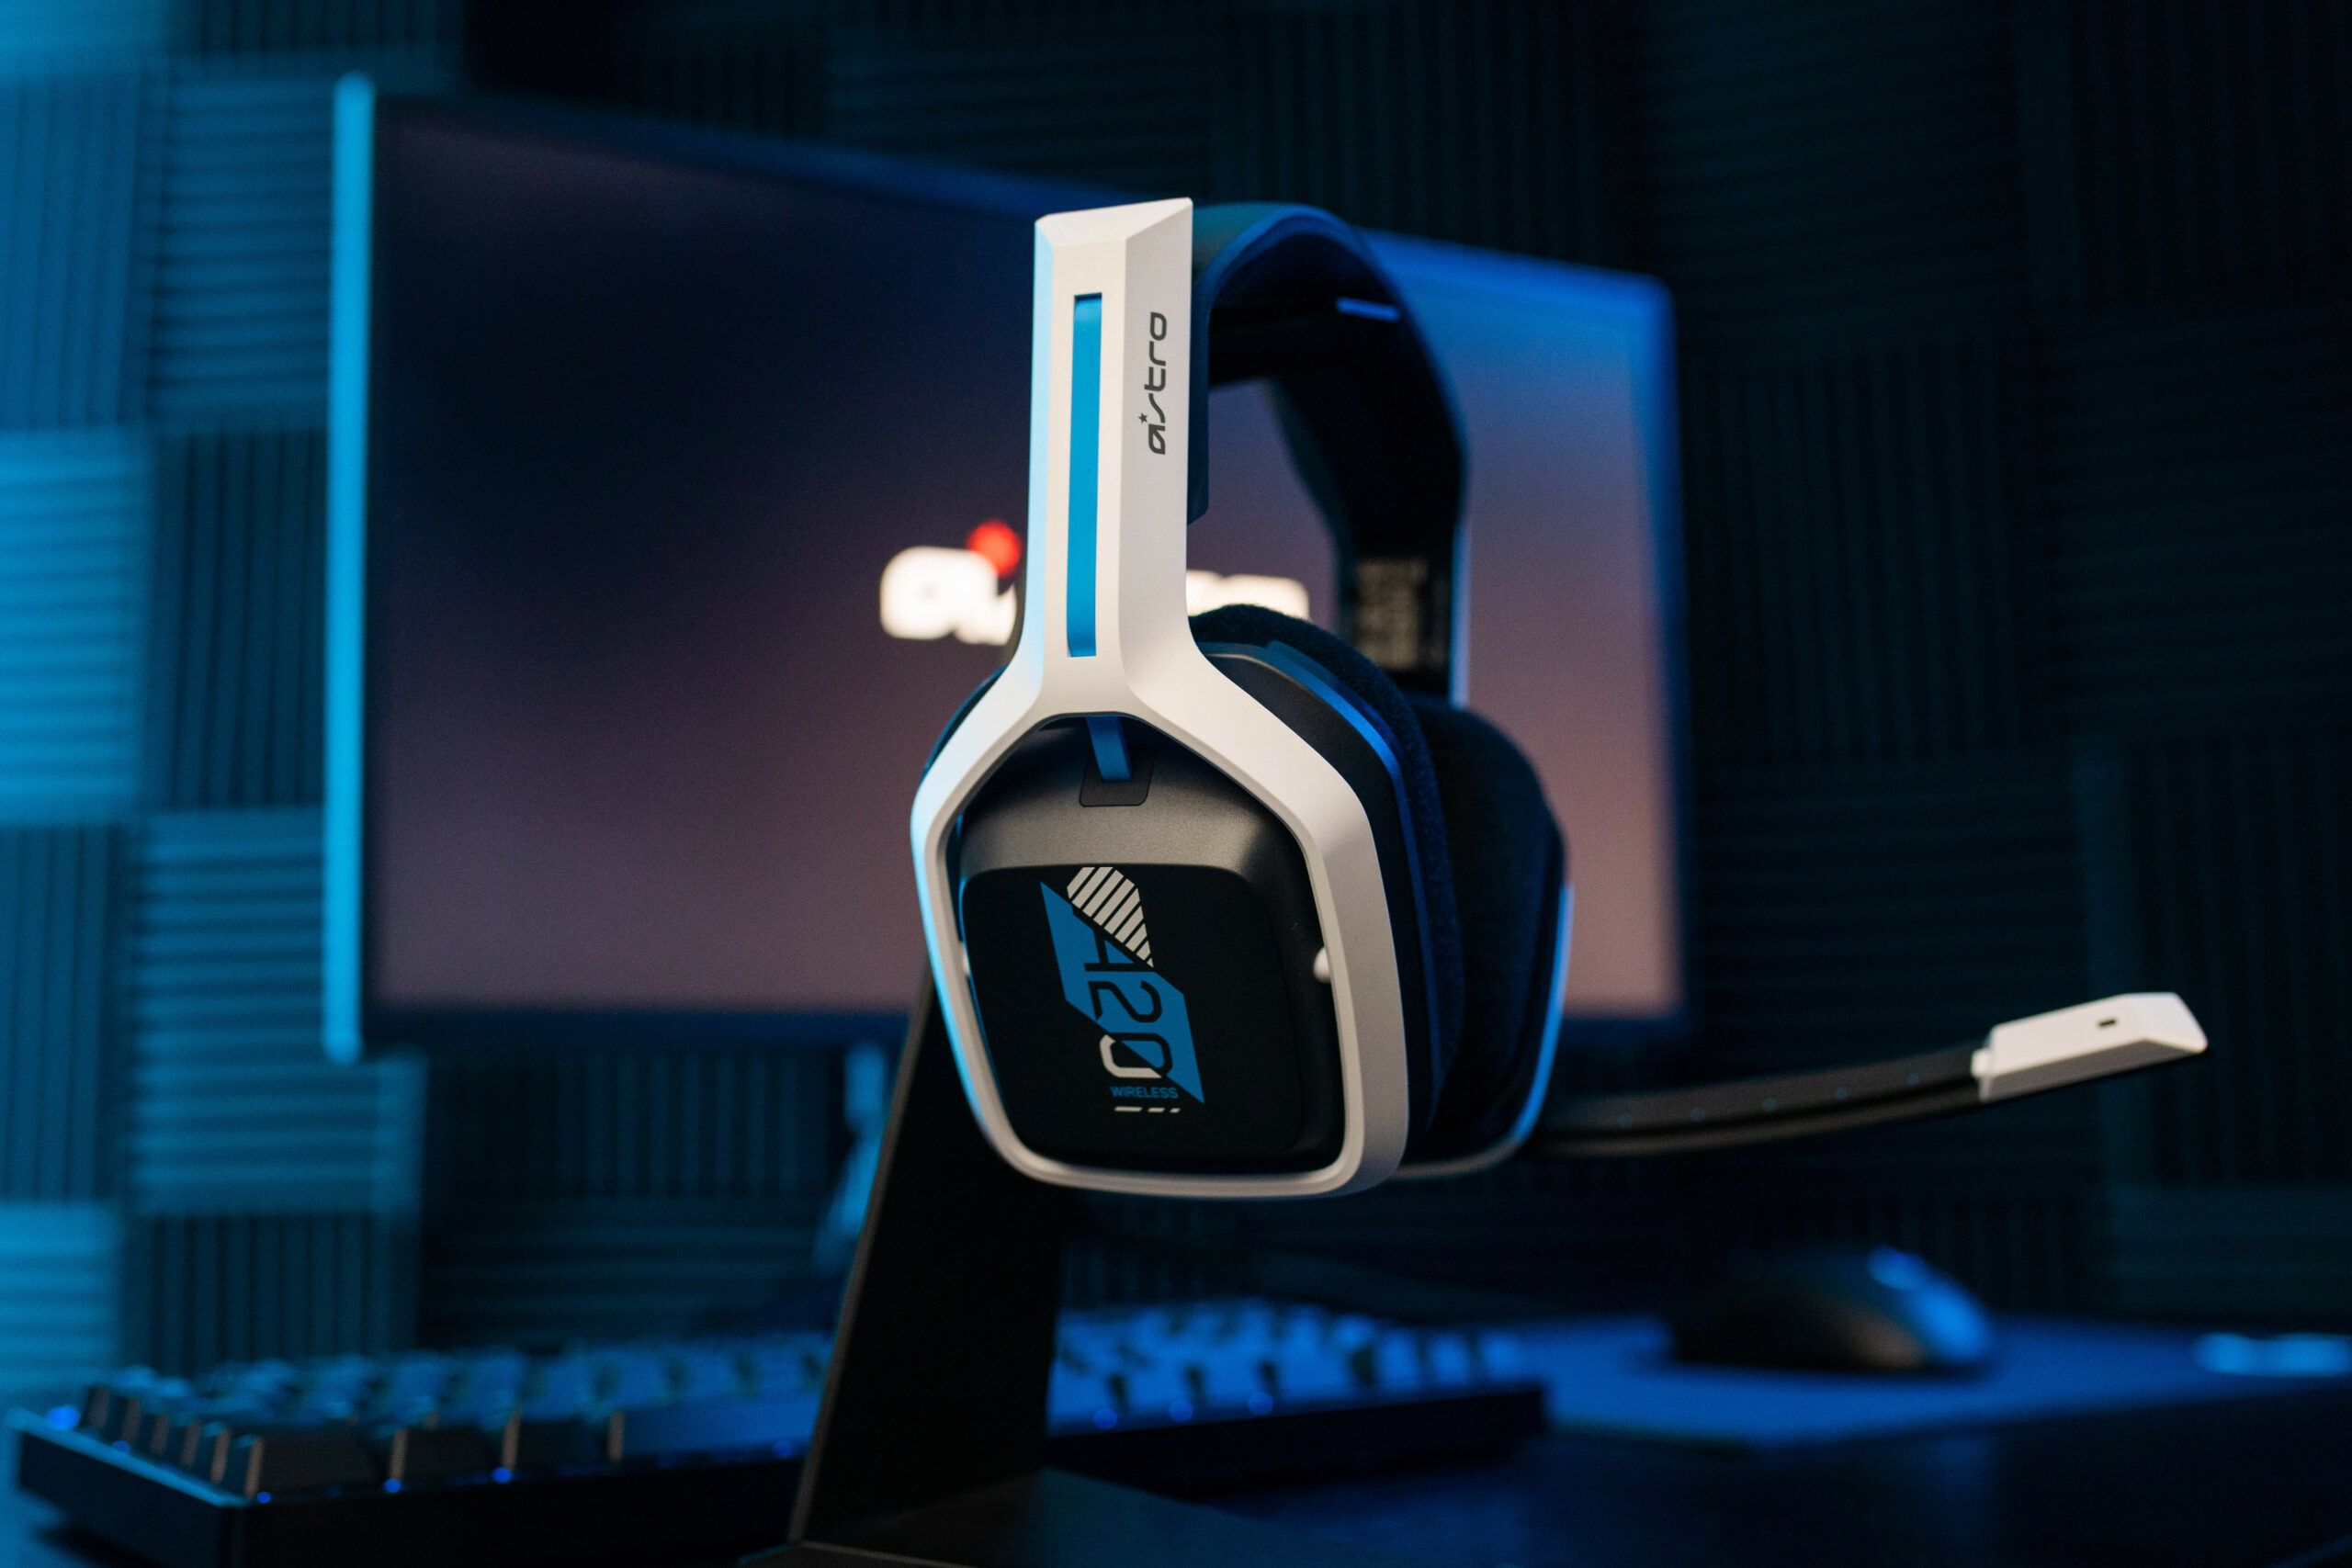 Astro a20 headset review